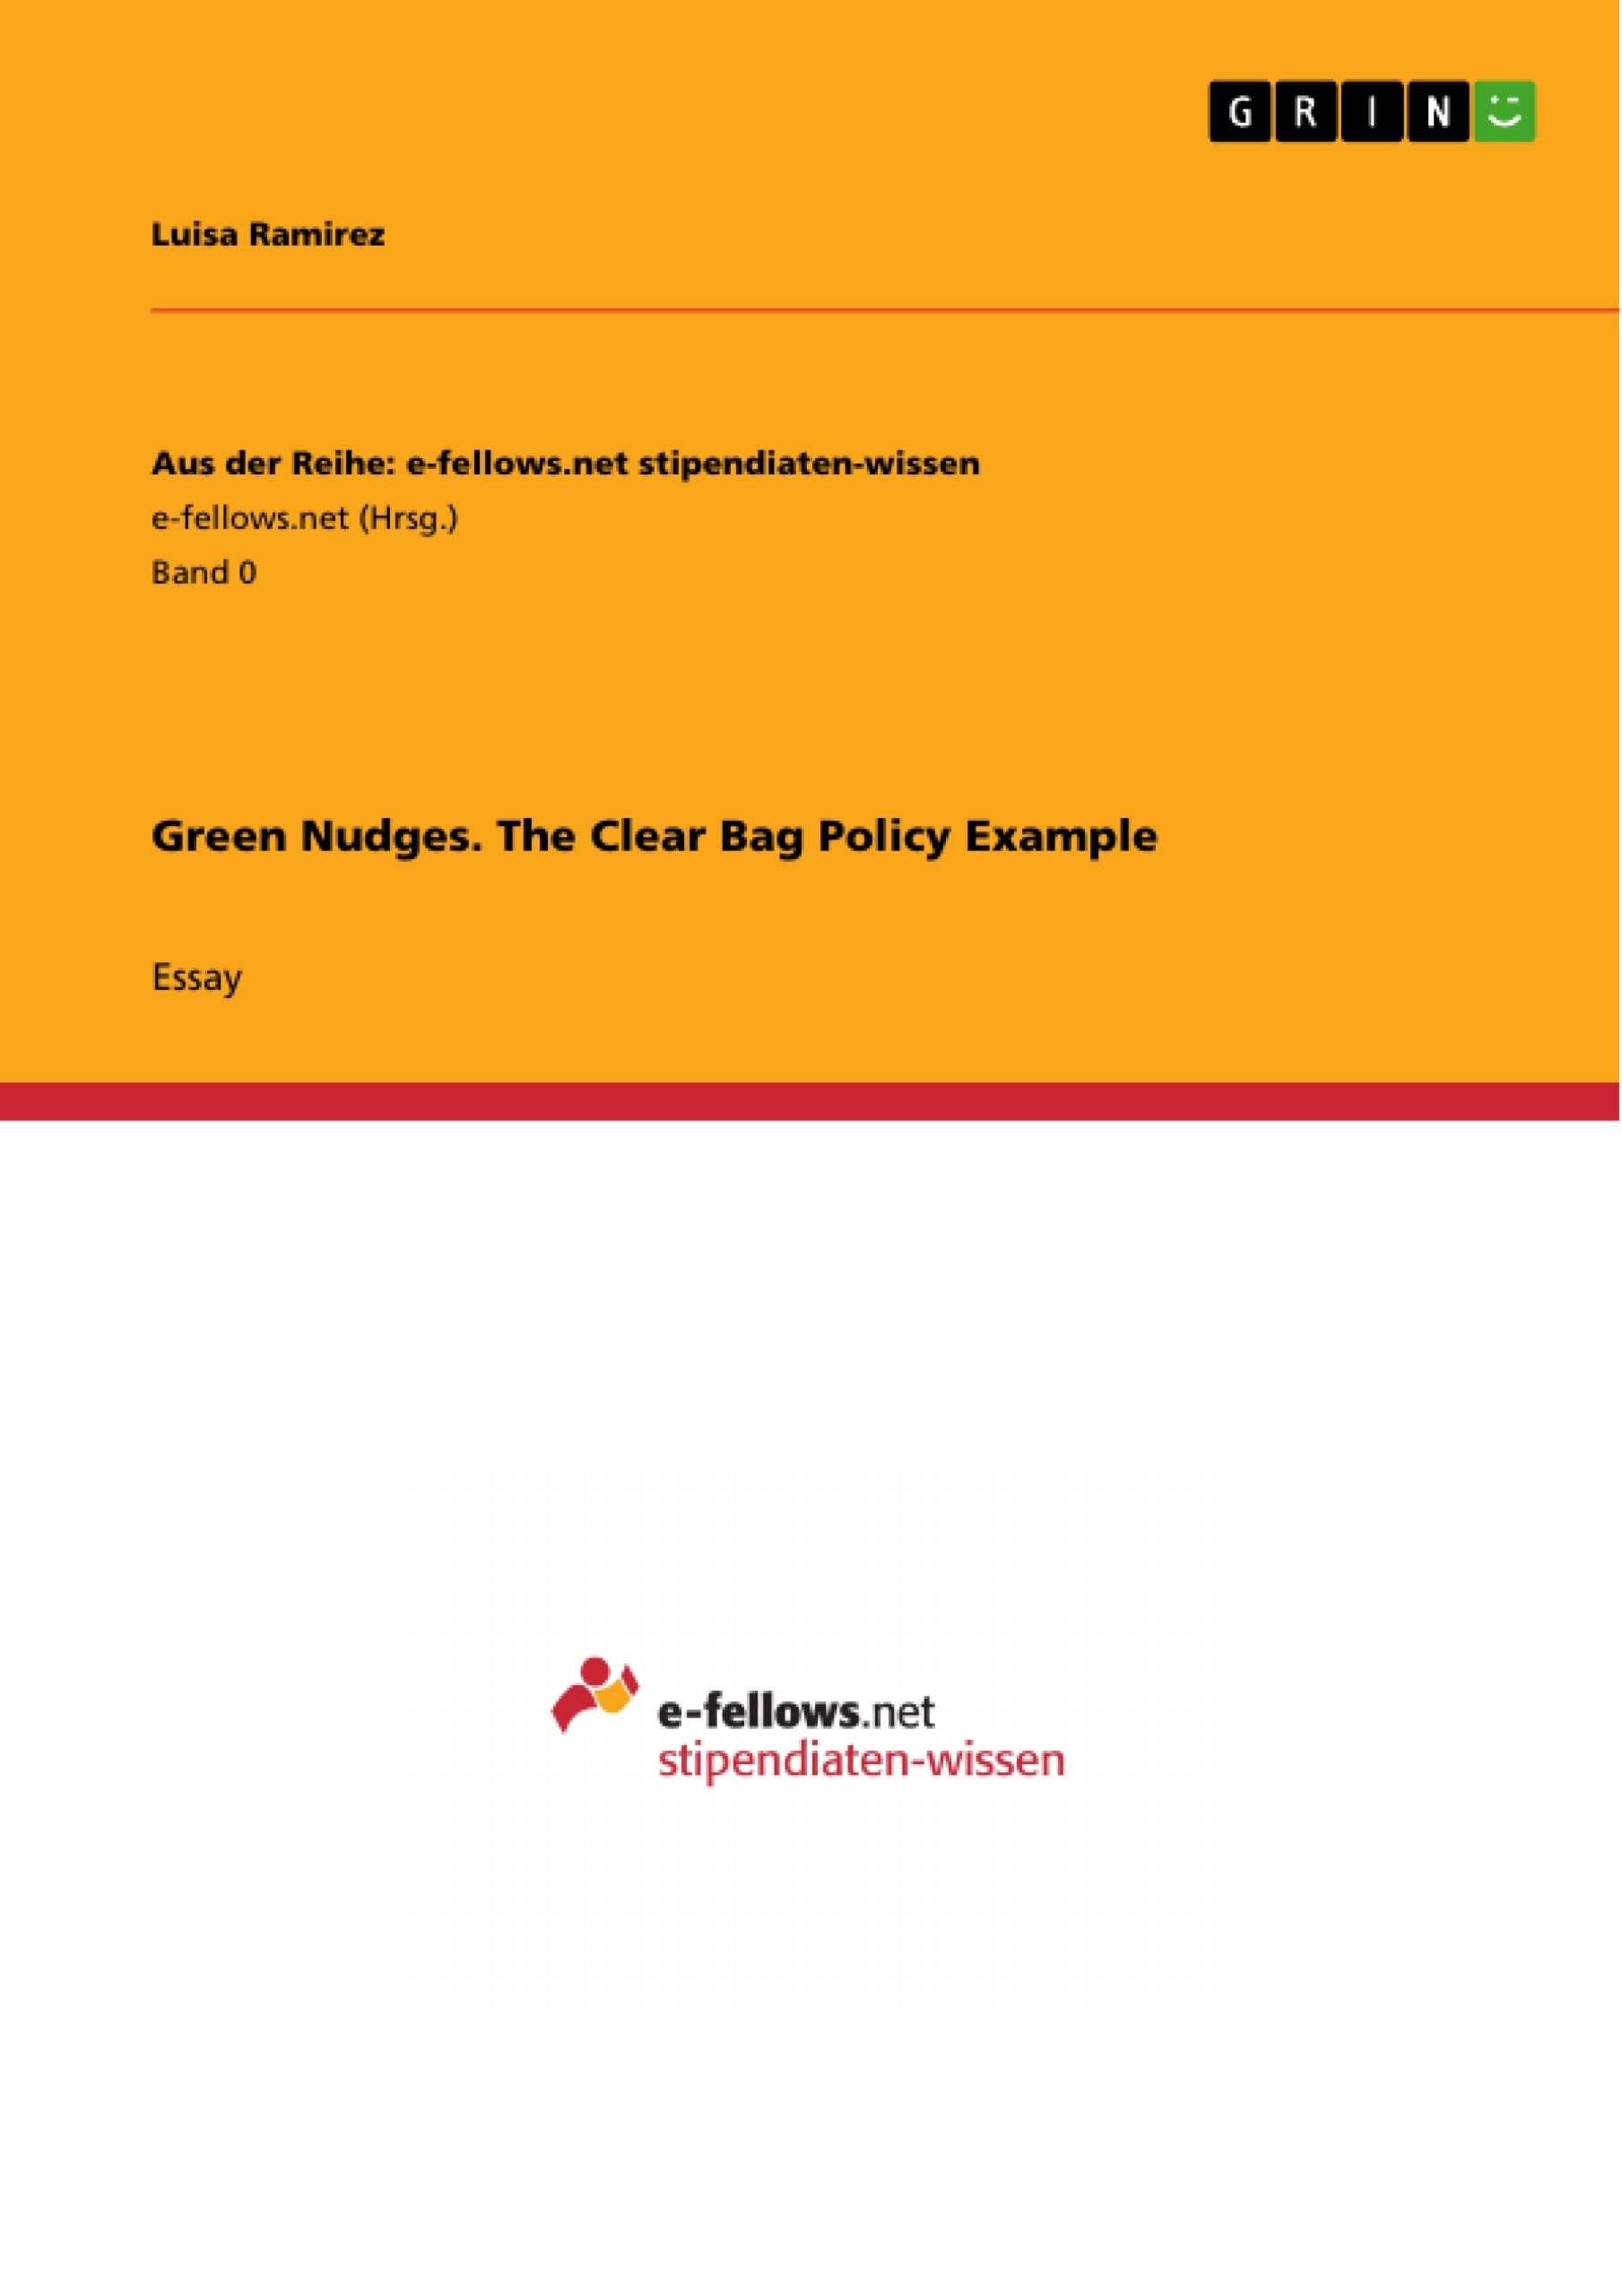 Titel: Green Nudges. The Clear Bag Policy Example